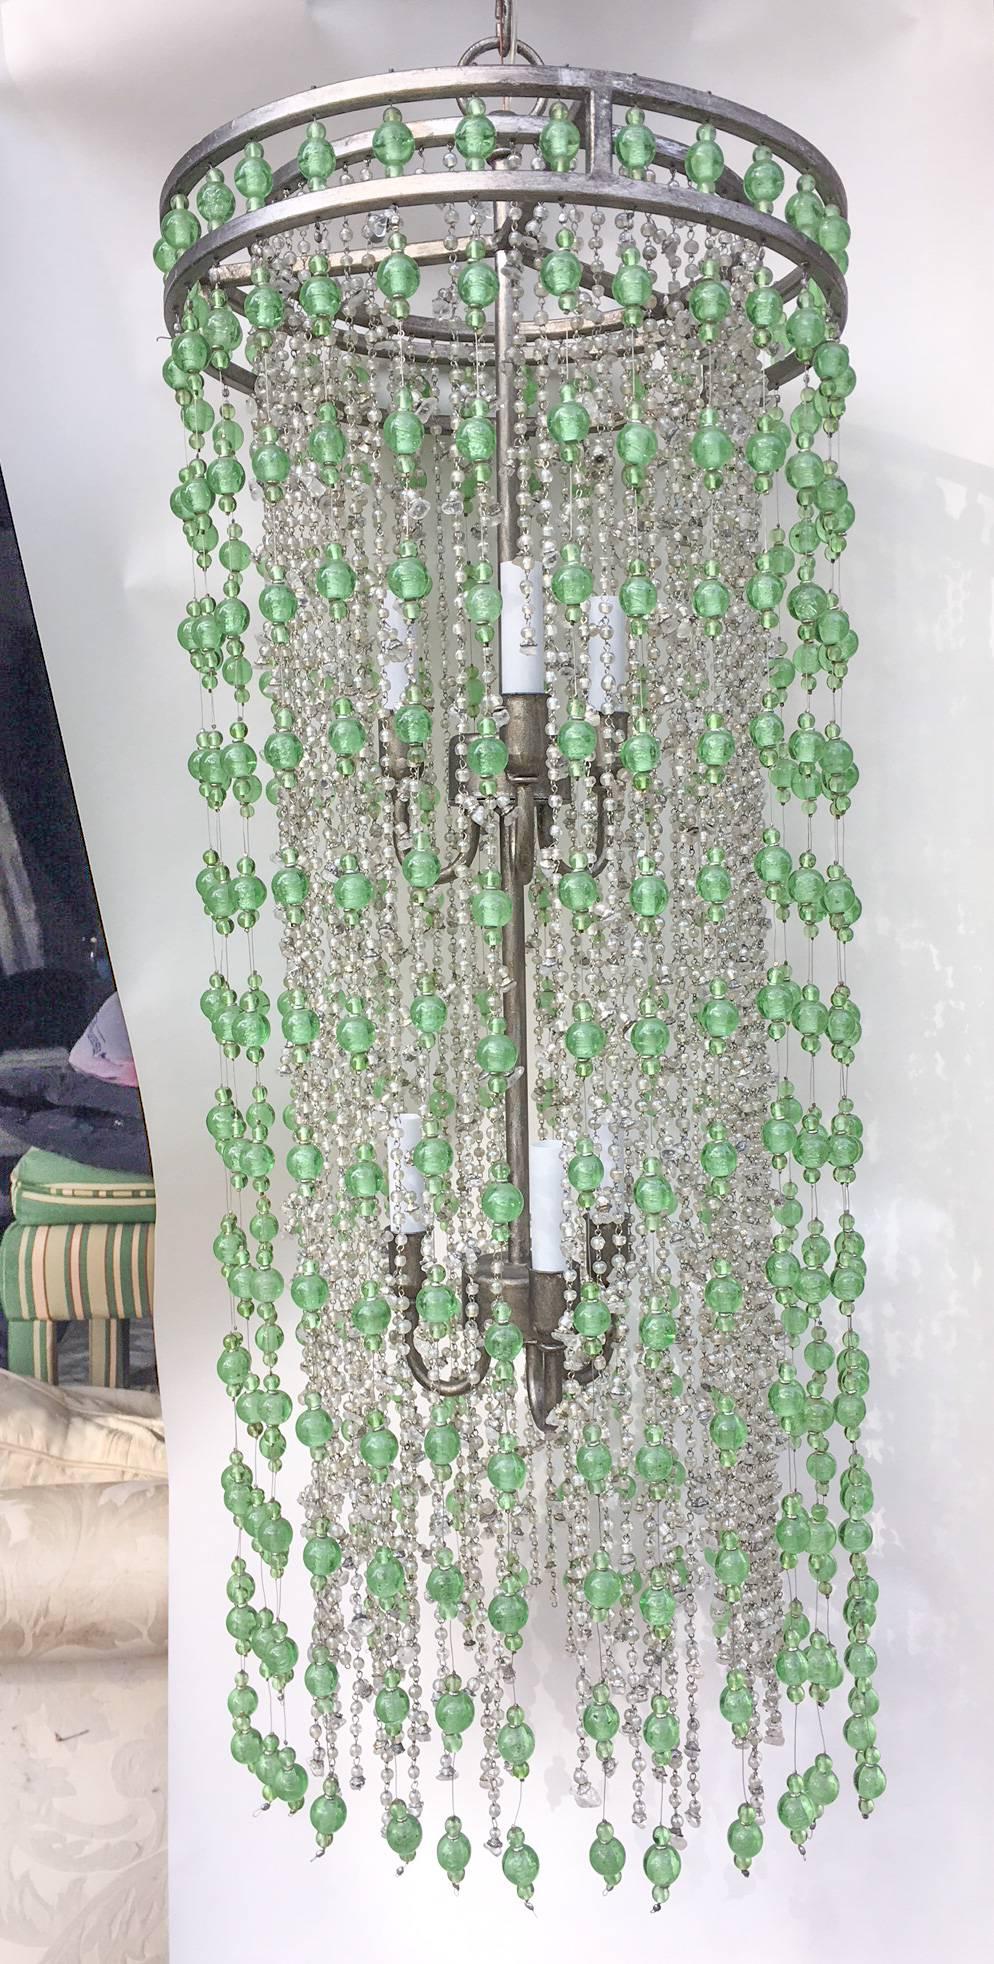 Beyond fabulous statement chandelier by the renowned Arteriors Home, featuring strings of individually hand-tied green and clear glass beads in various sizes and lengths on silver wire. The frame is silver leaf painted metal and includes two